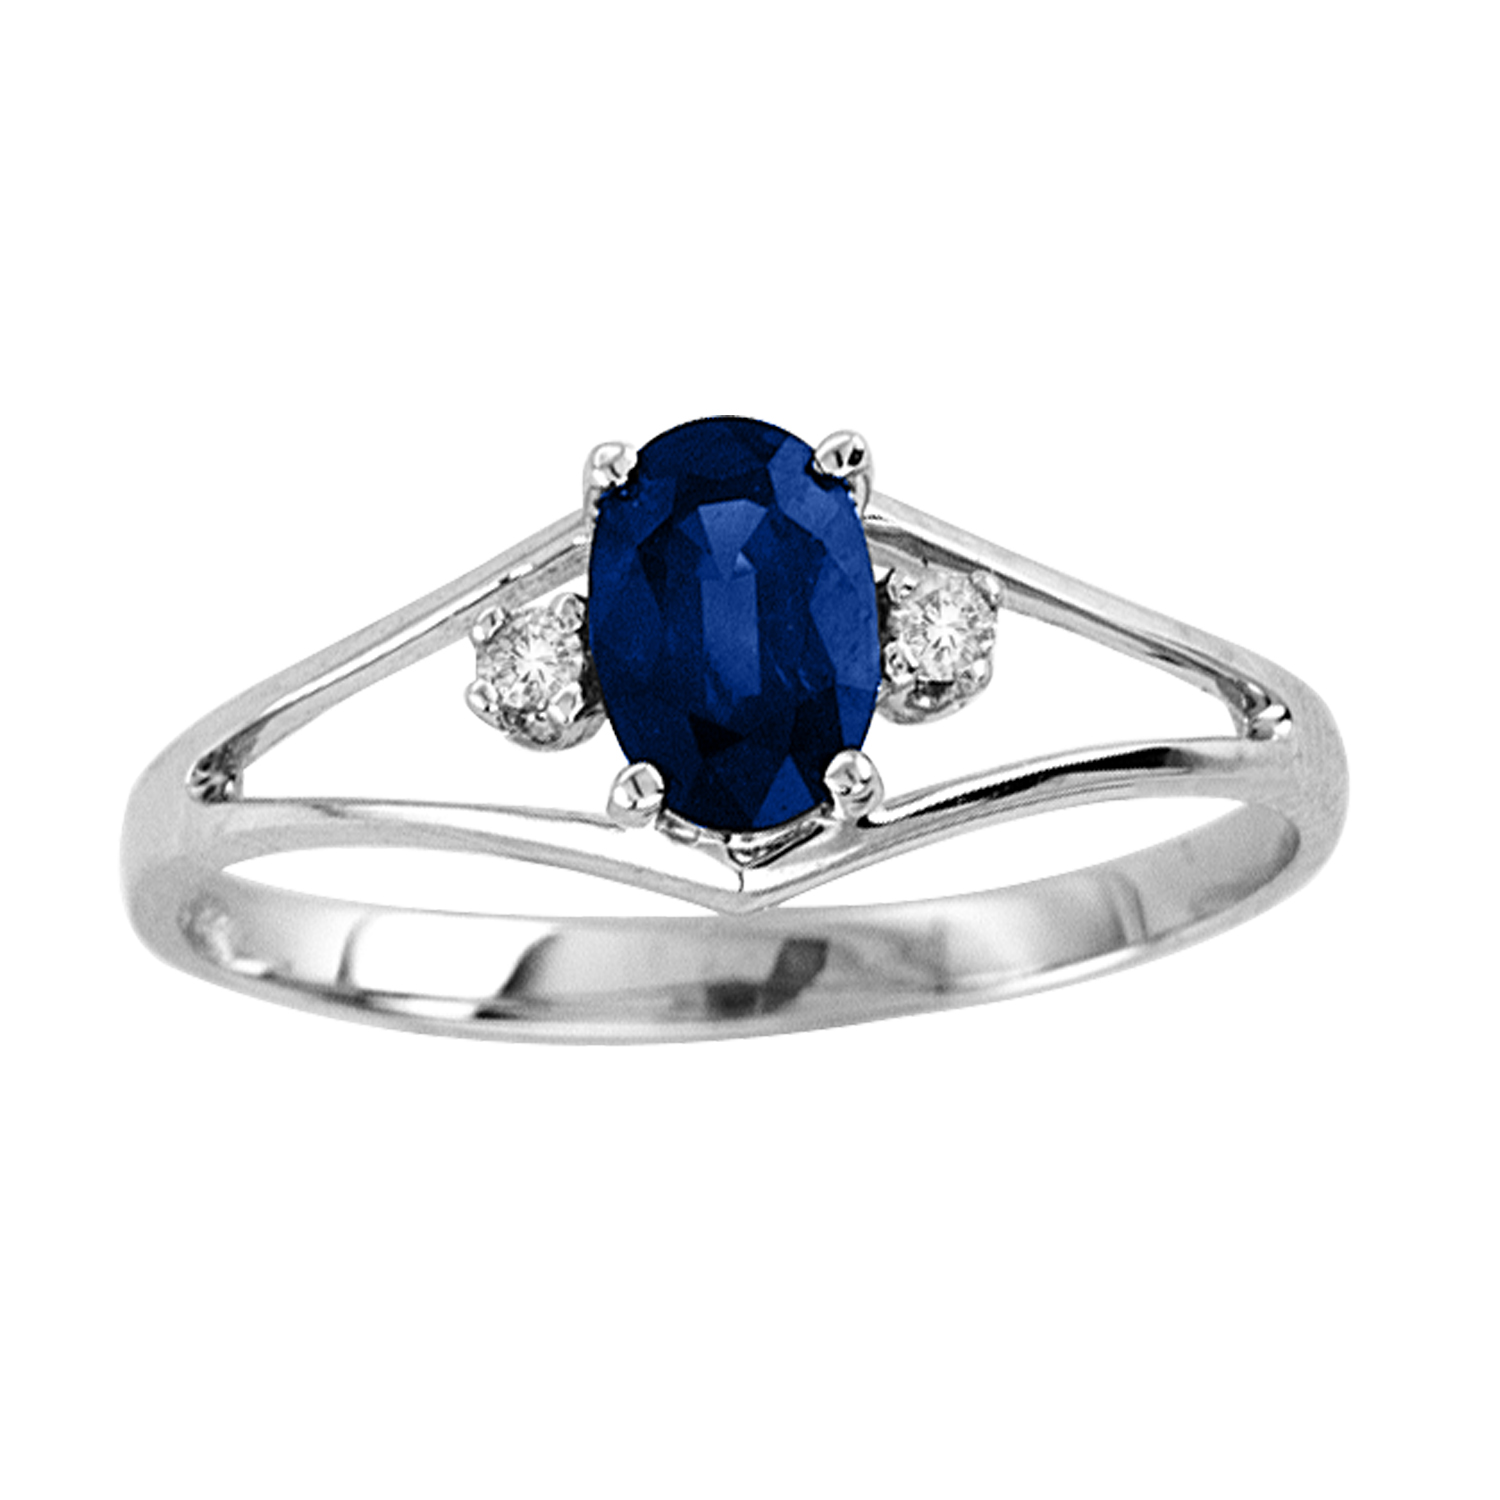 Oval Sapphire and Diamond Ring set in 14k Gold 